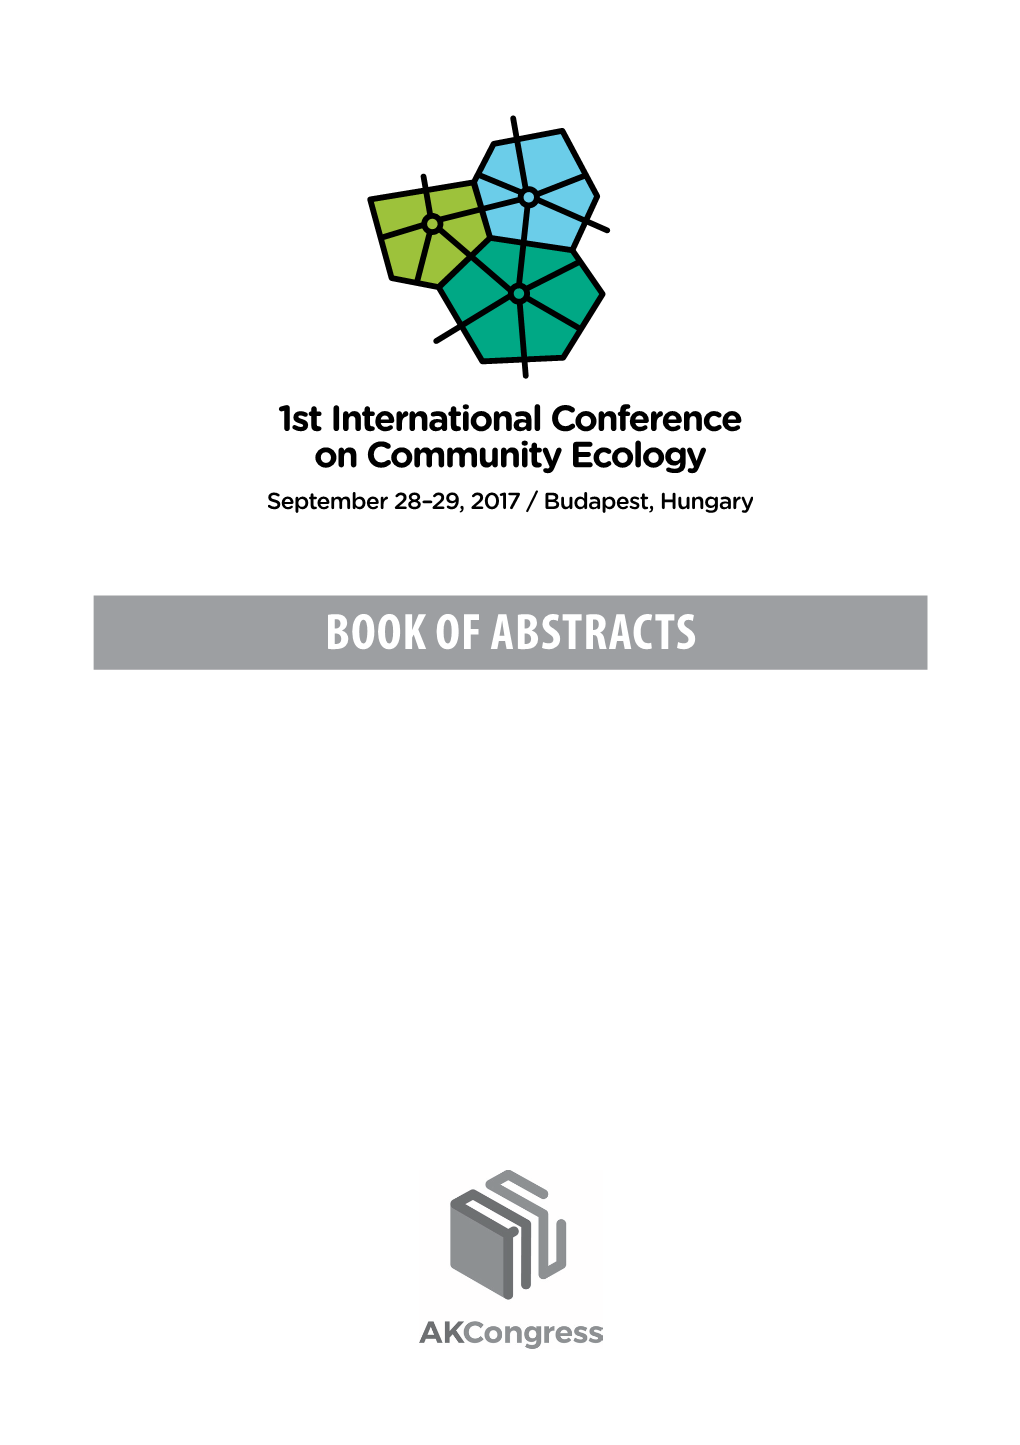 BOOK of ABSTRACTS Comec2017 September 28–29, 2017, Budapest, Hungary